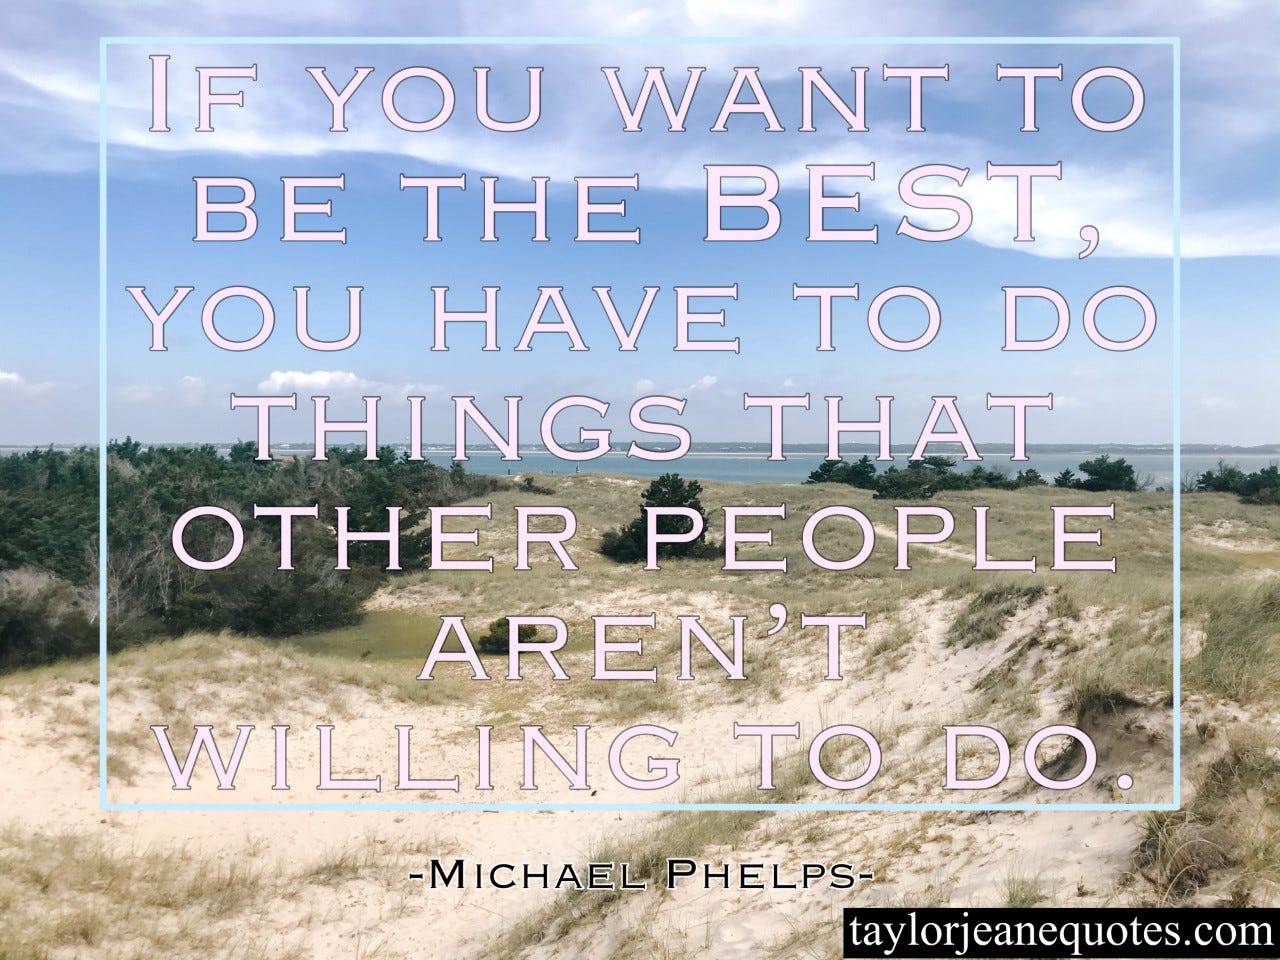 taylor jeane quotes, quote of the day, michael phelps, michael phelps quotes, olympics quotes, swimming quotes, motivational quotes, olympics quotes, motivational olympics quotes, hard work quotes, productivity quotes, michael phelps quotes